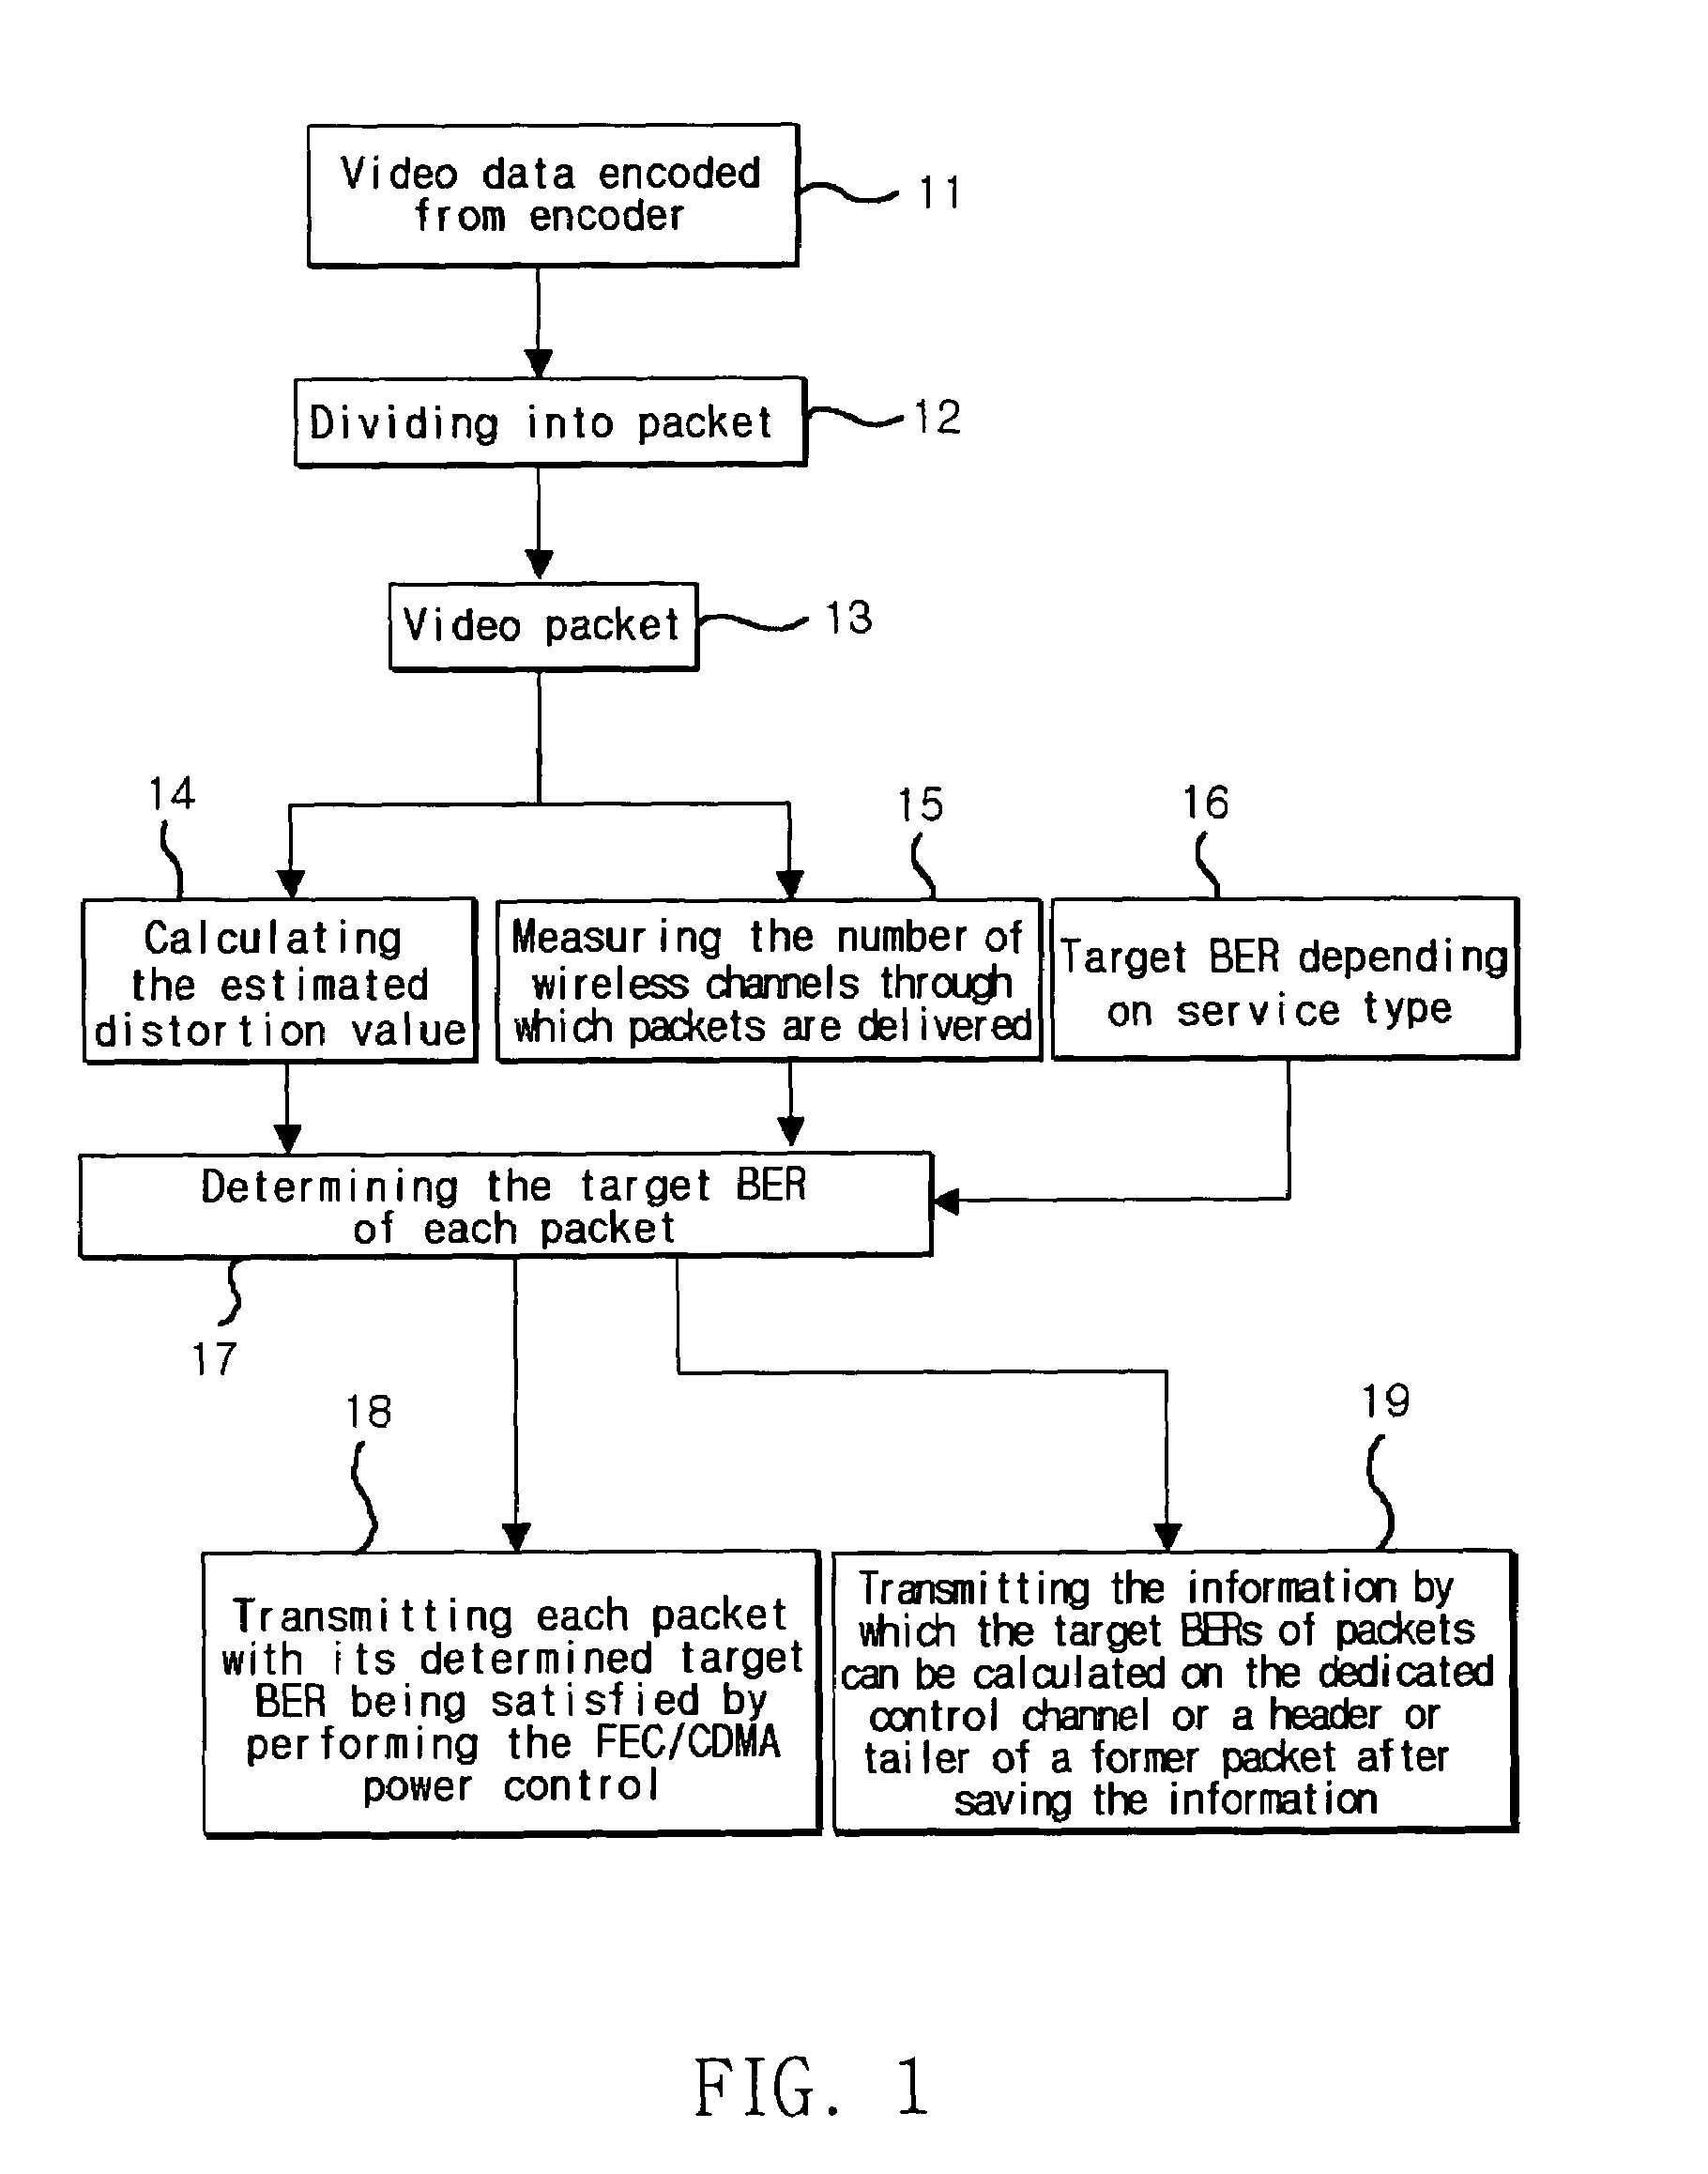 Method for controlling the target bit error rate of each packet in wired and wireless video communication systems